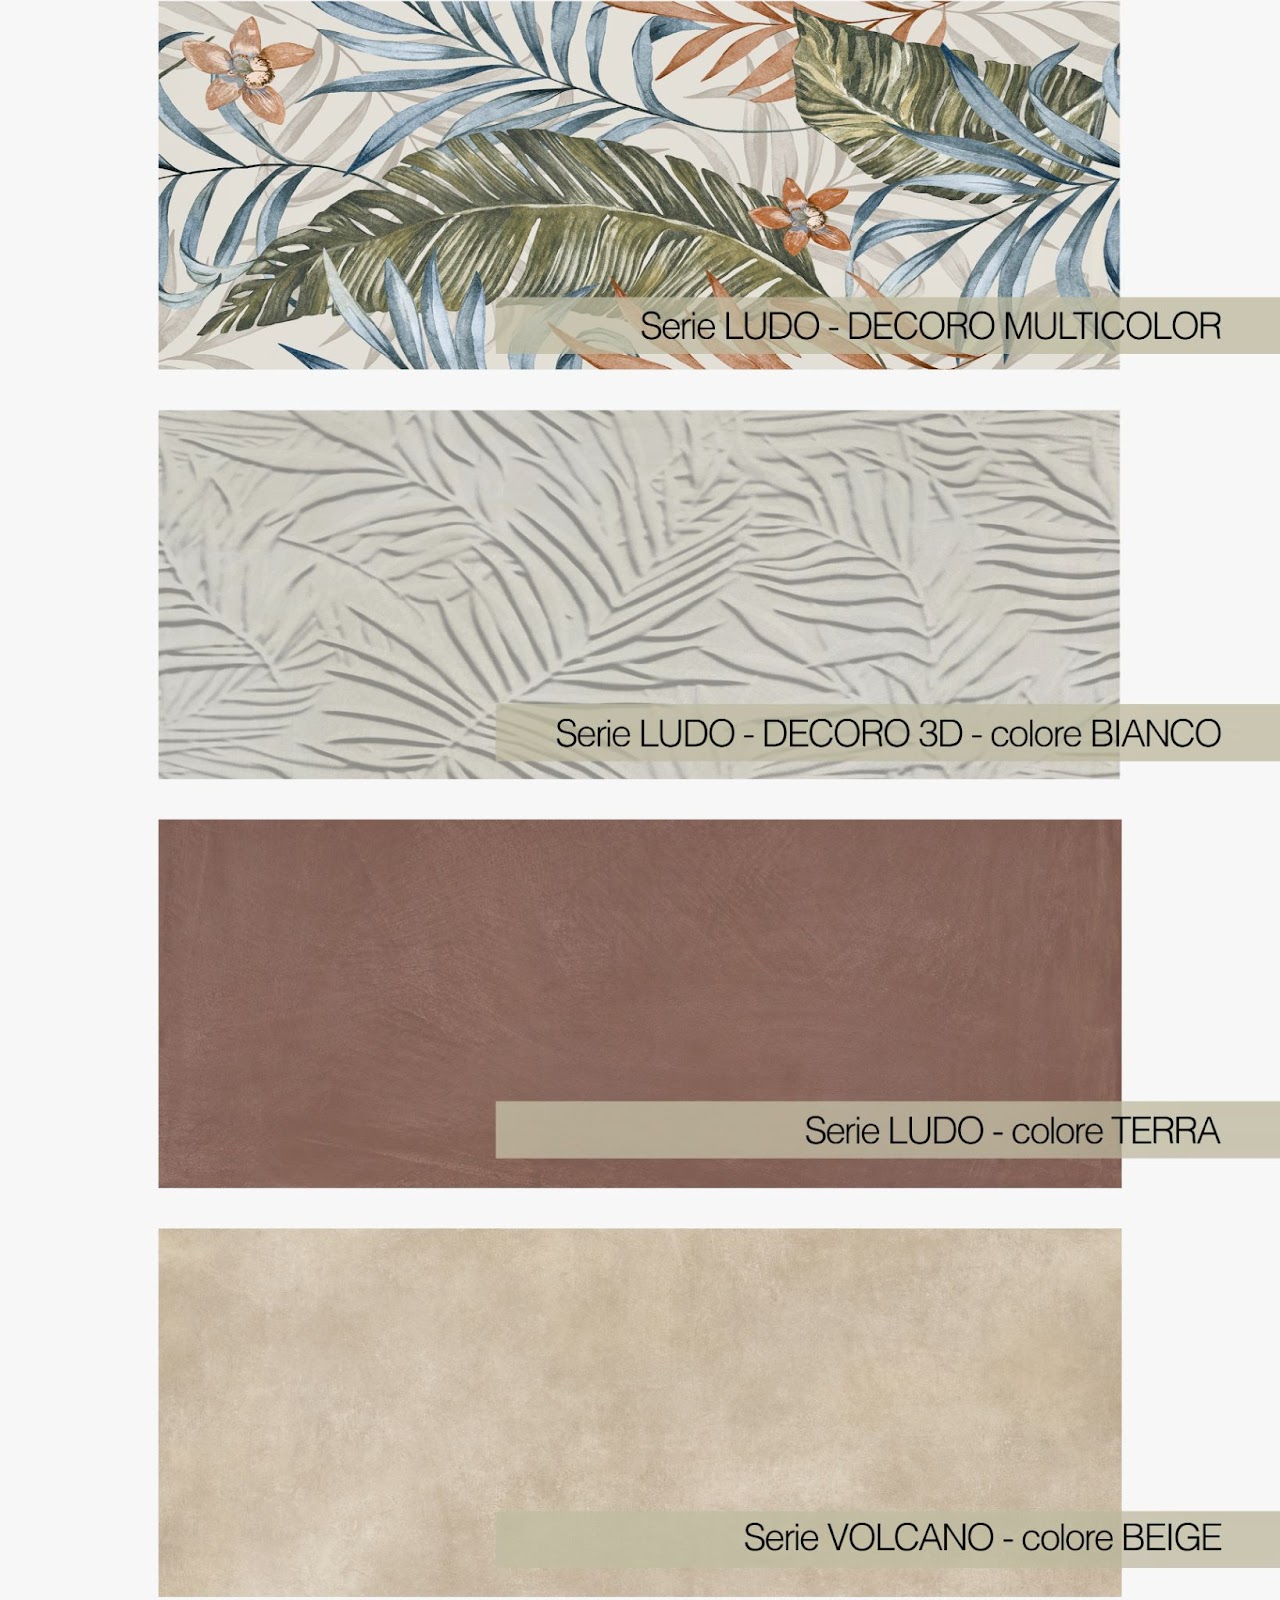 Selected ceramic coverings for the bathroom: Volcano and Ludo series